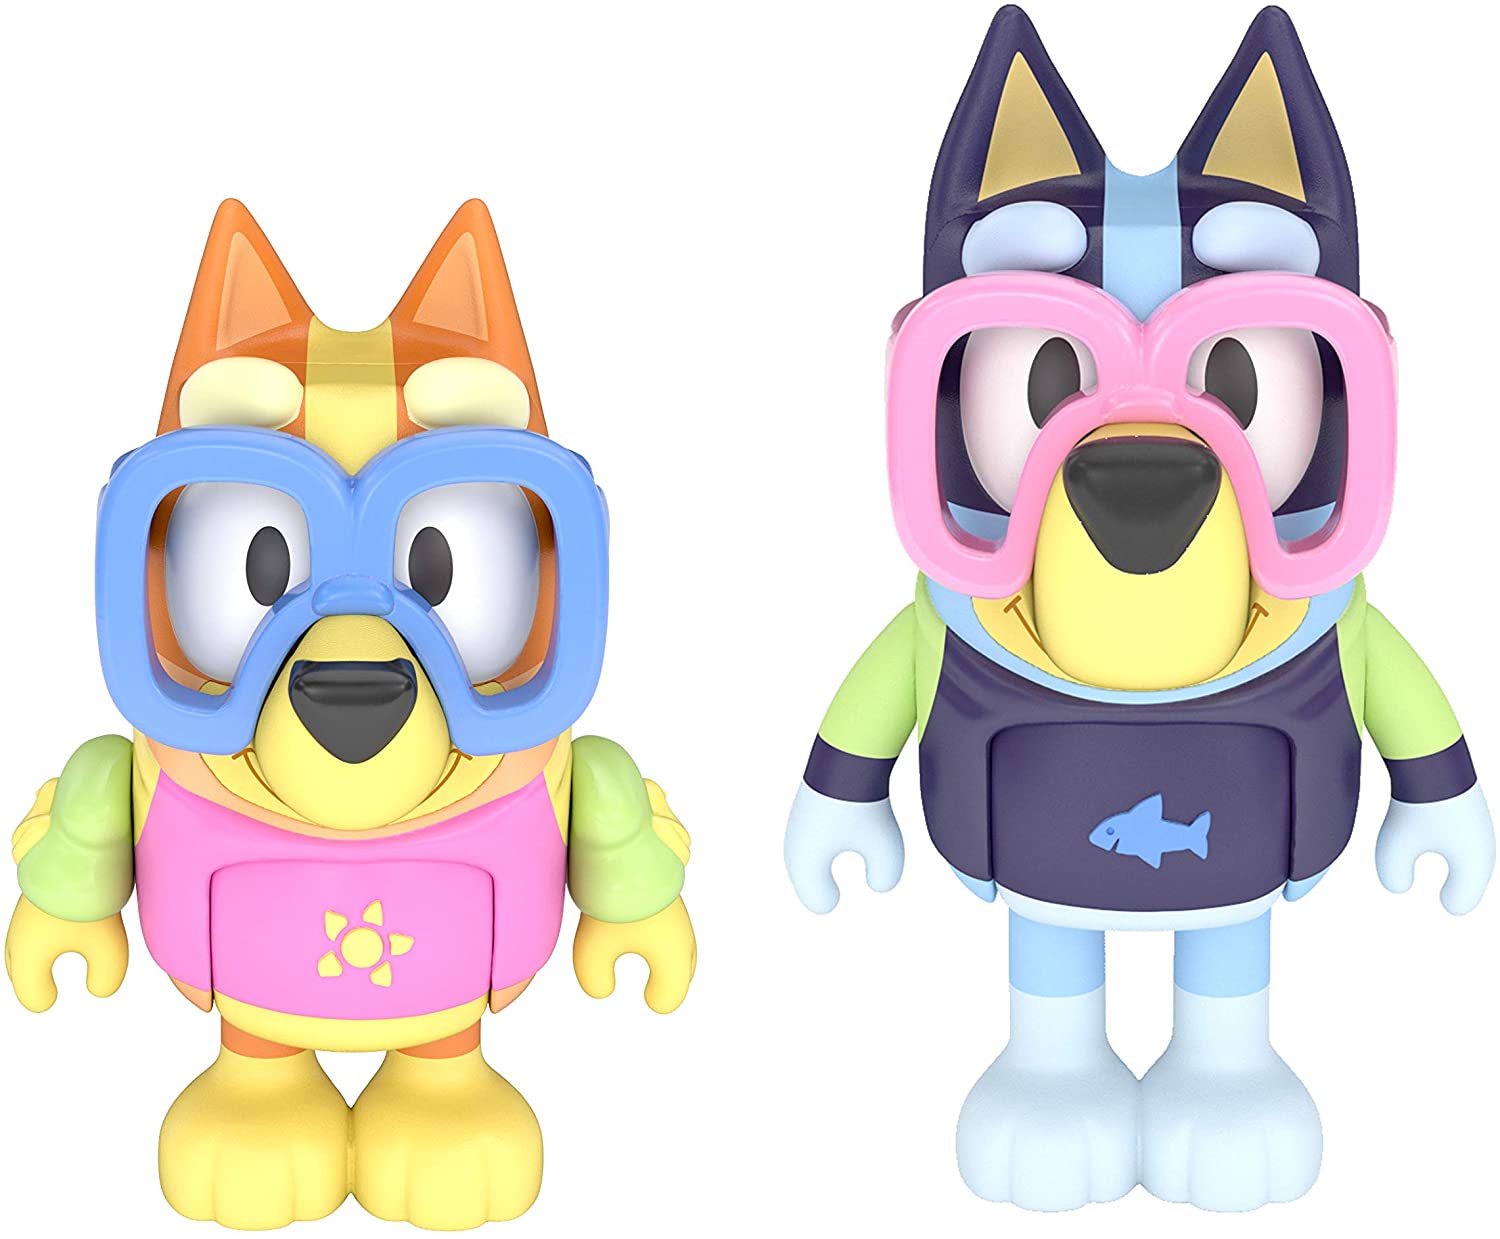 Bluey Time: Bluey & Bingo 2.5 inch Figures Pack, Multicolor: Toys & Games